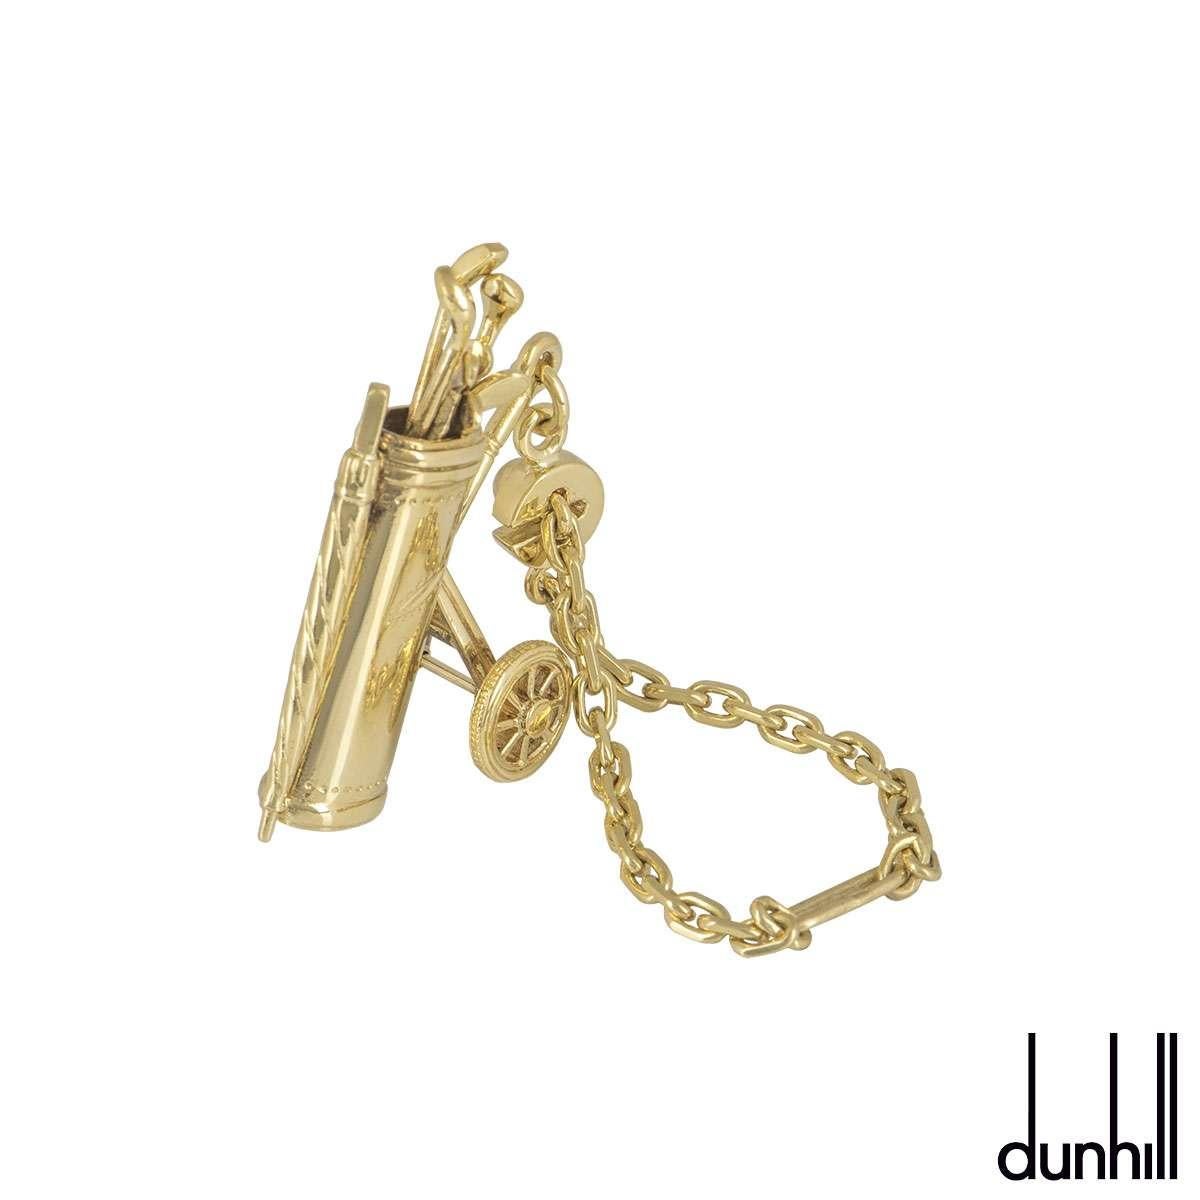 dunhill keychain